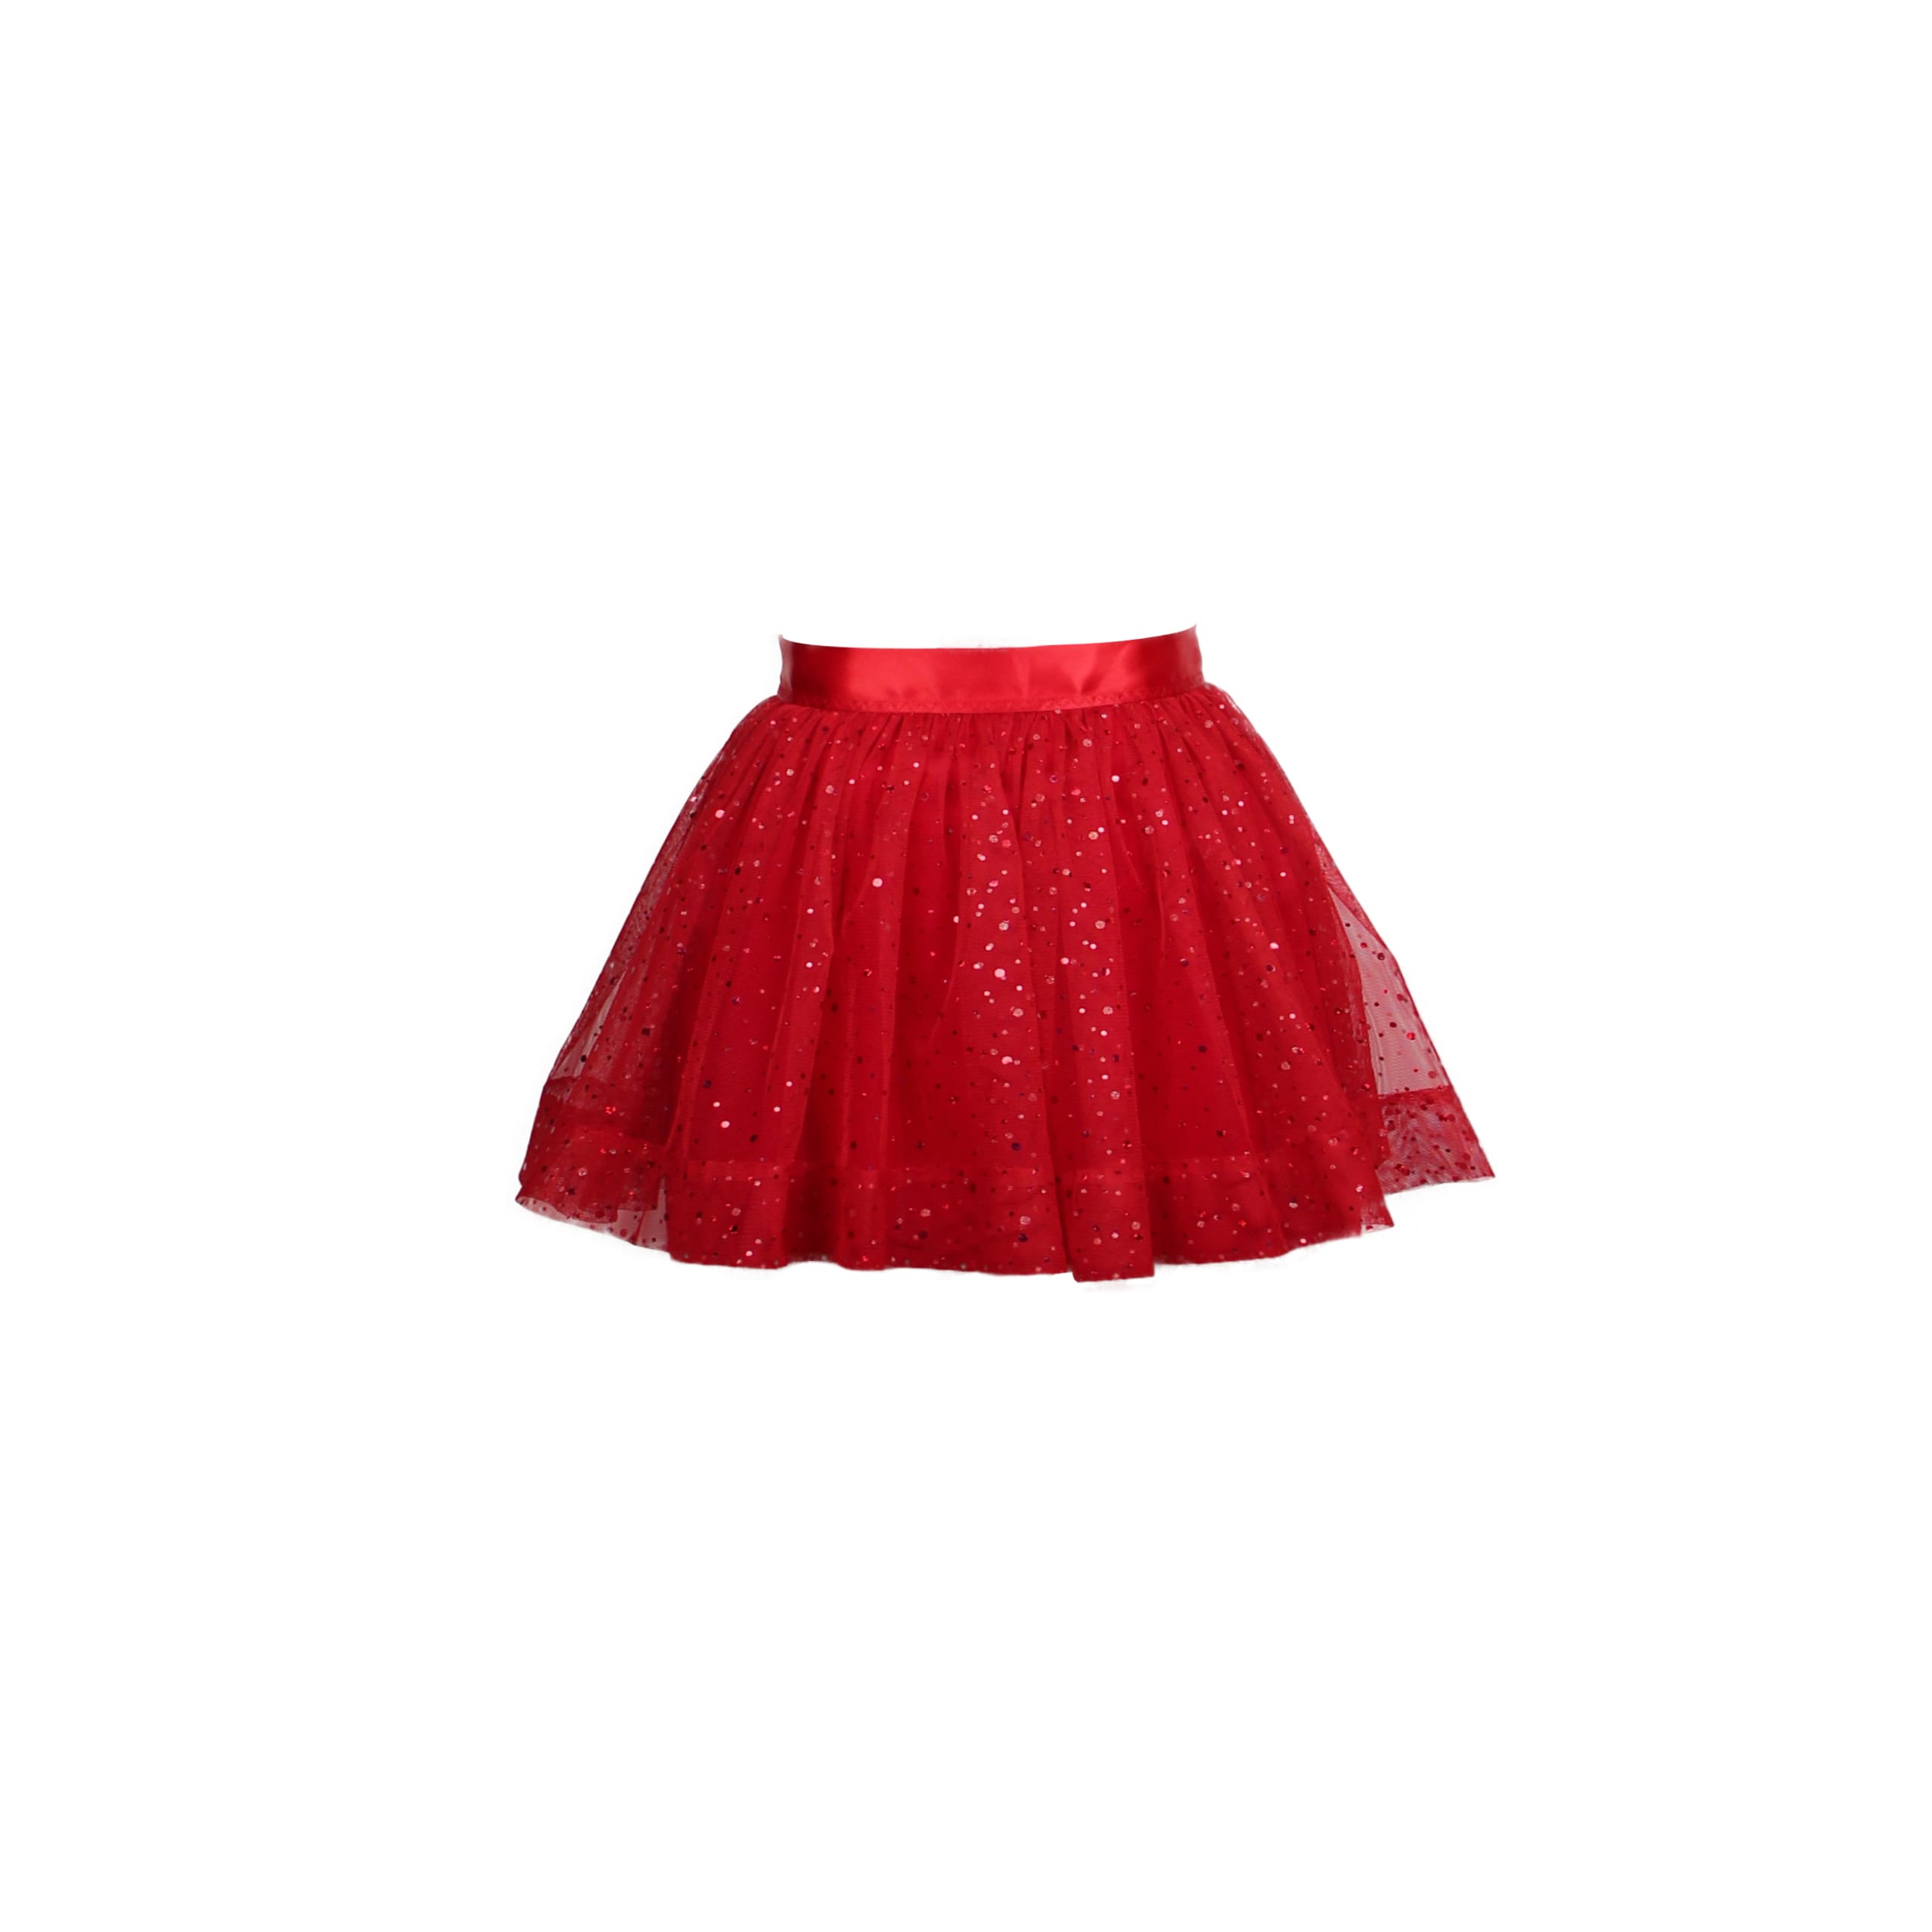 “Voyage” Mini Skirt | Fifi Chachnil - Official website